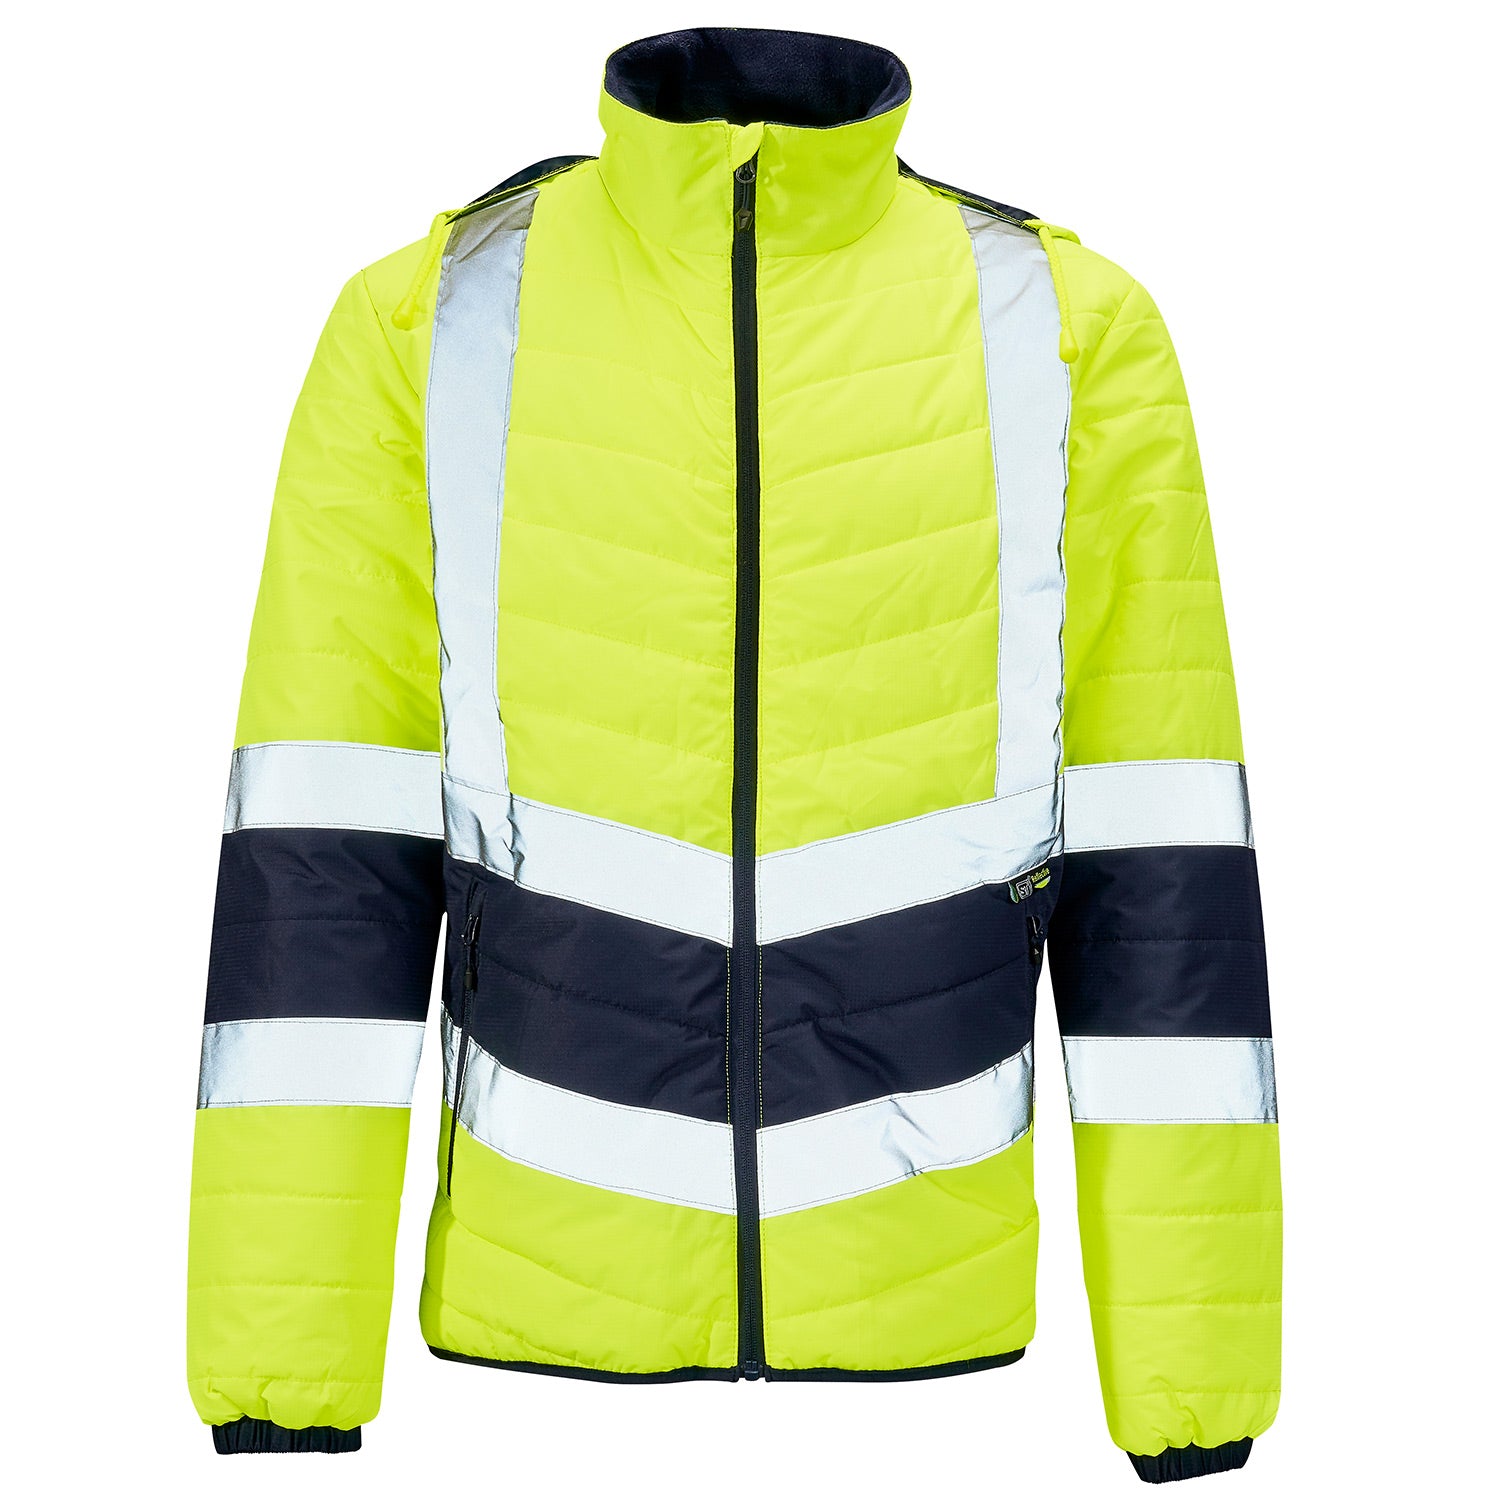 Supertouch Supertouch Hi Vis Yellow 2 Tone Puffer Jacket - H144